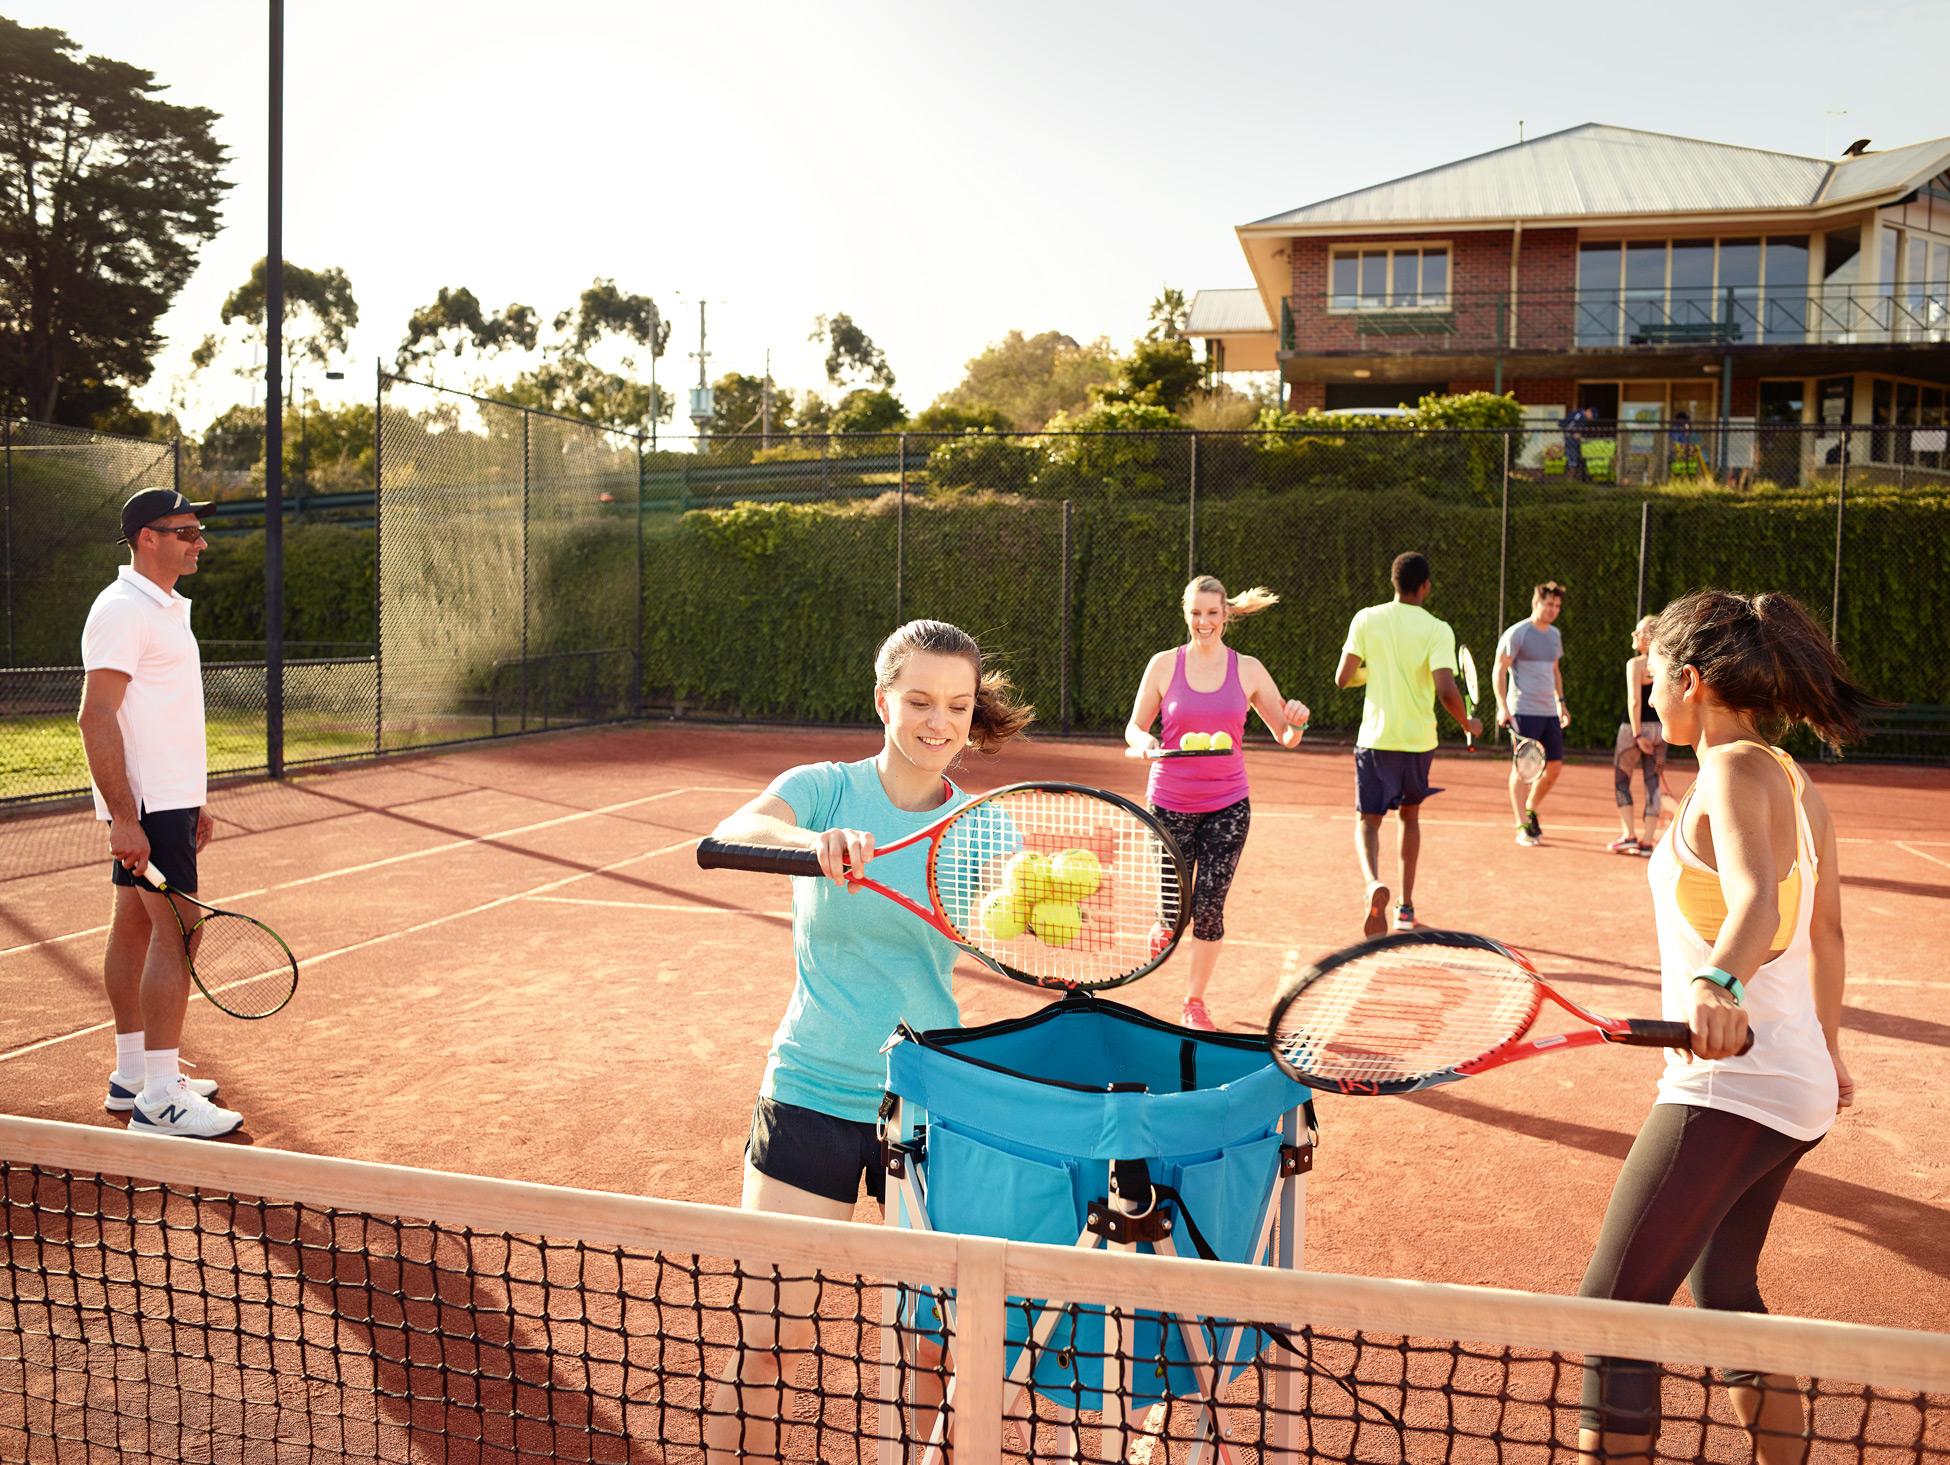 ``I really love the Cardio Tennis sessions. The coaches make it fun and it's a great way to keep fit!`` - Levili Wakeling